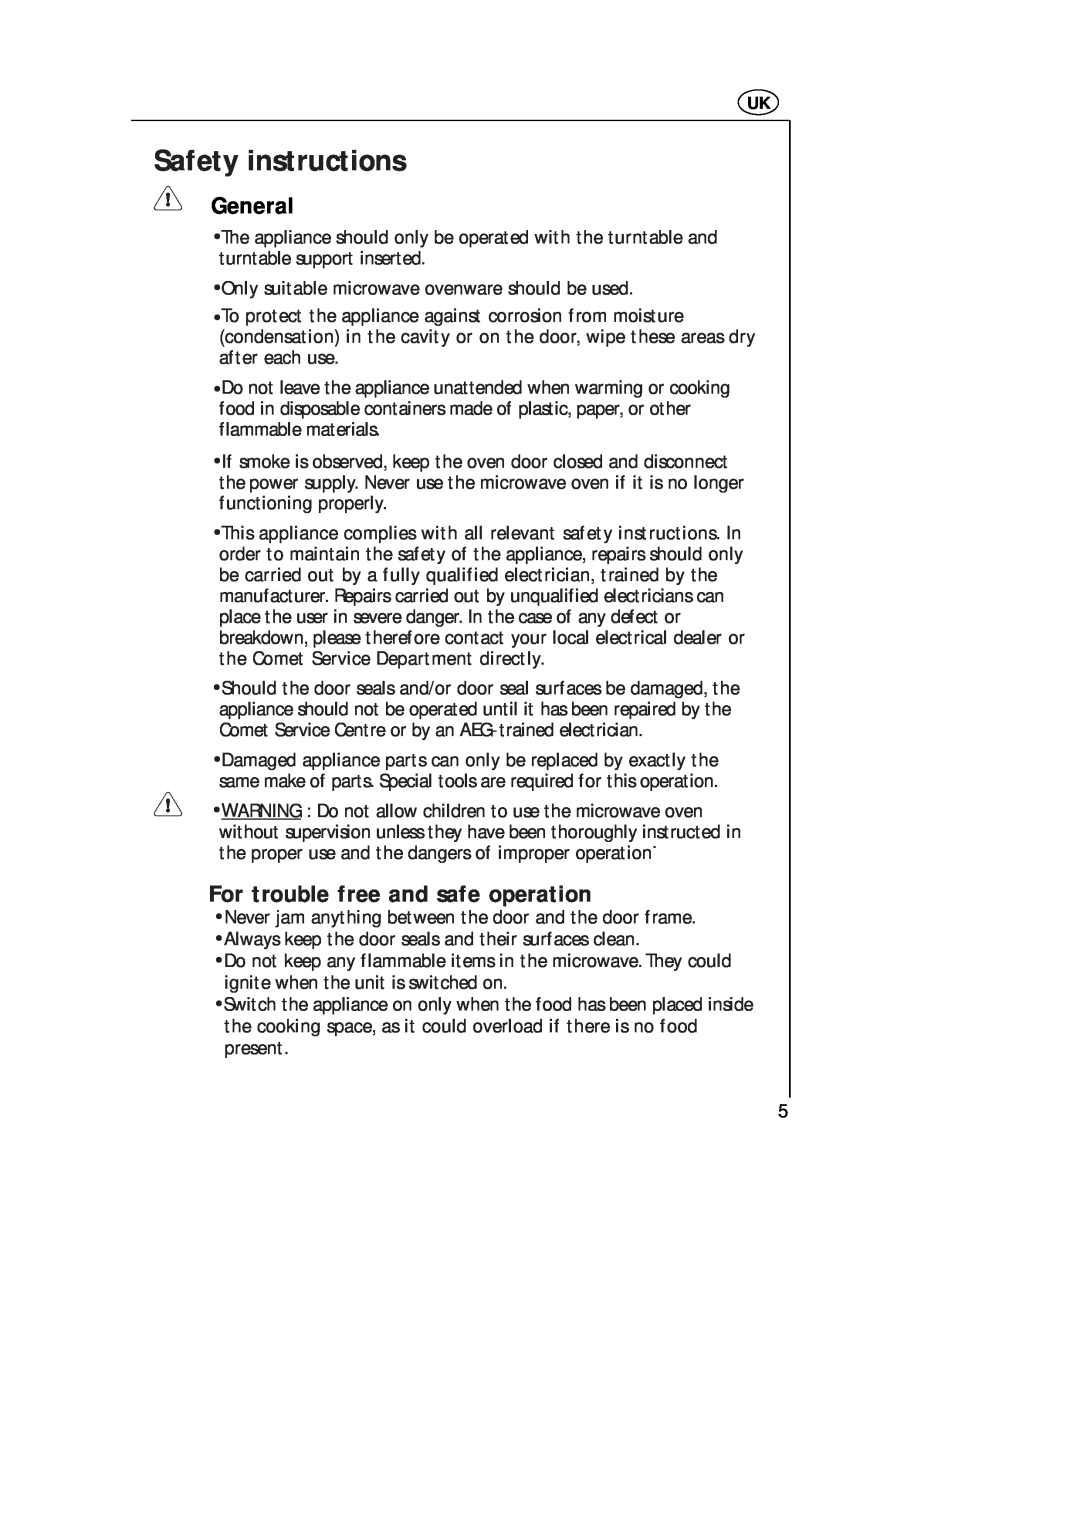 AEG MC_170 manual Safety instructions, General, For trouble free and safe operation 